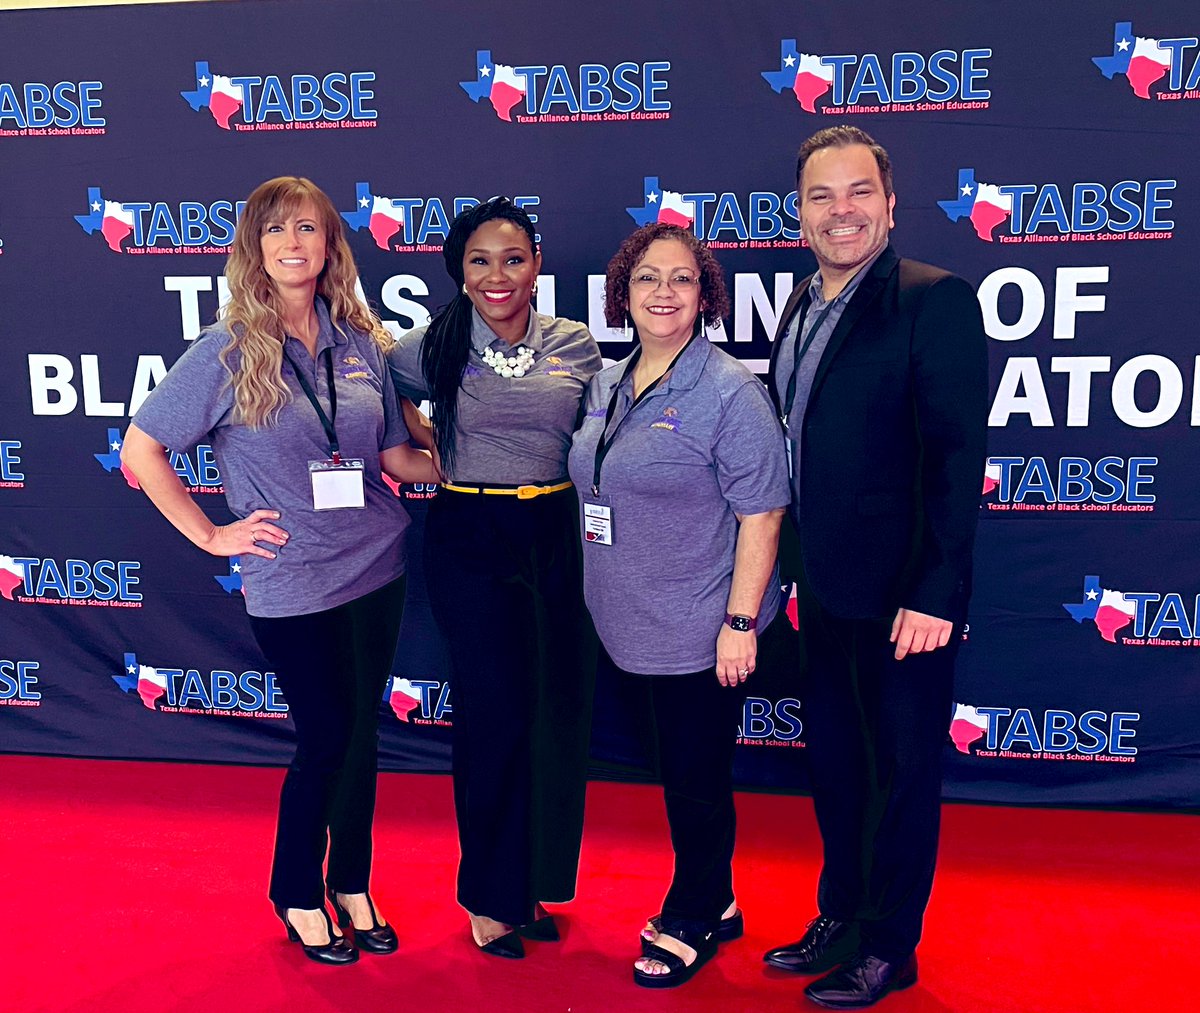 So honored to present along side these leaders as a FortBend ISD 𝑫𝒓𝑱𝒂𝒚𝑪𝒖𝒎𝒎𝒊𝒏𝒈𝒔 𝑫𝒆𝒎𝒐𝒏𝒔𝒕𝒓𝒂𝒕𝒊𝒐𝒏 𝑺𝒄𝒉𝒐𝒐𝒍 during the 2024 @TABSE_Texas conference